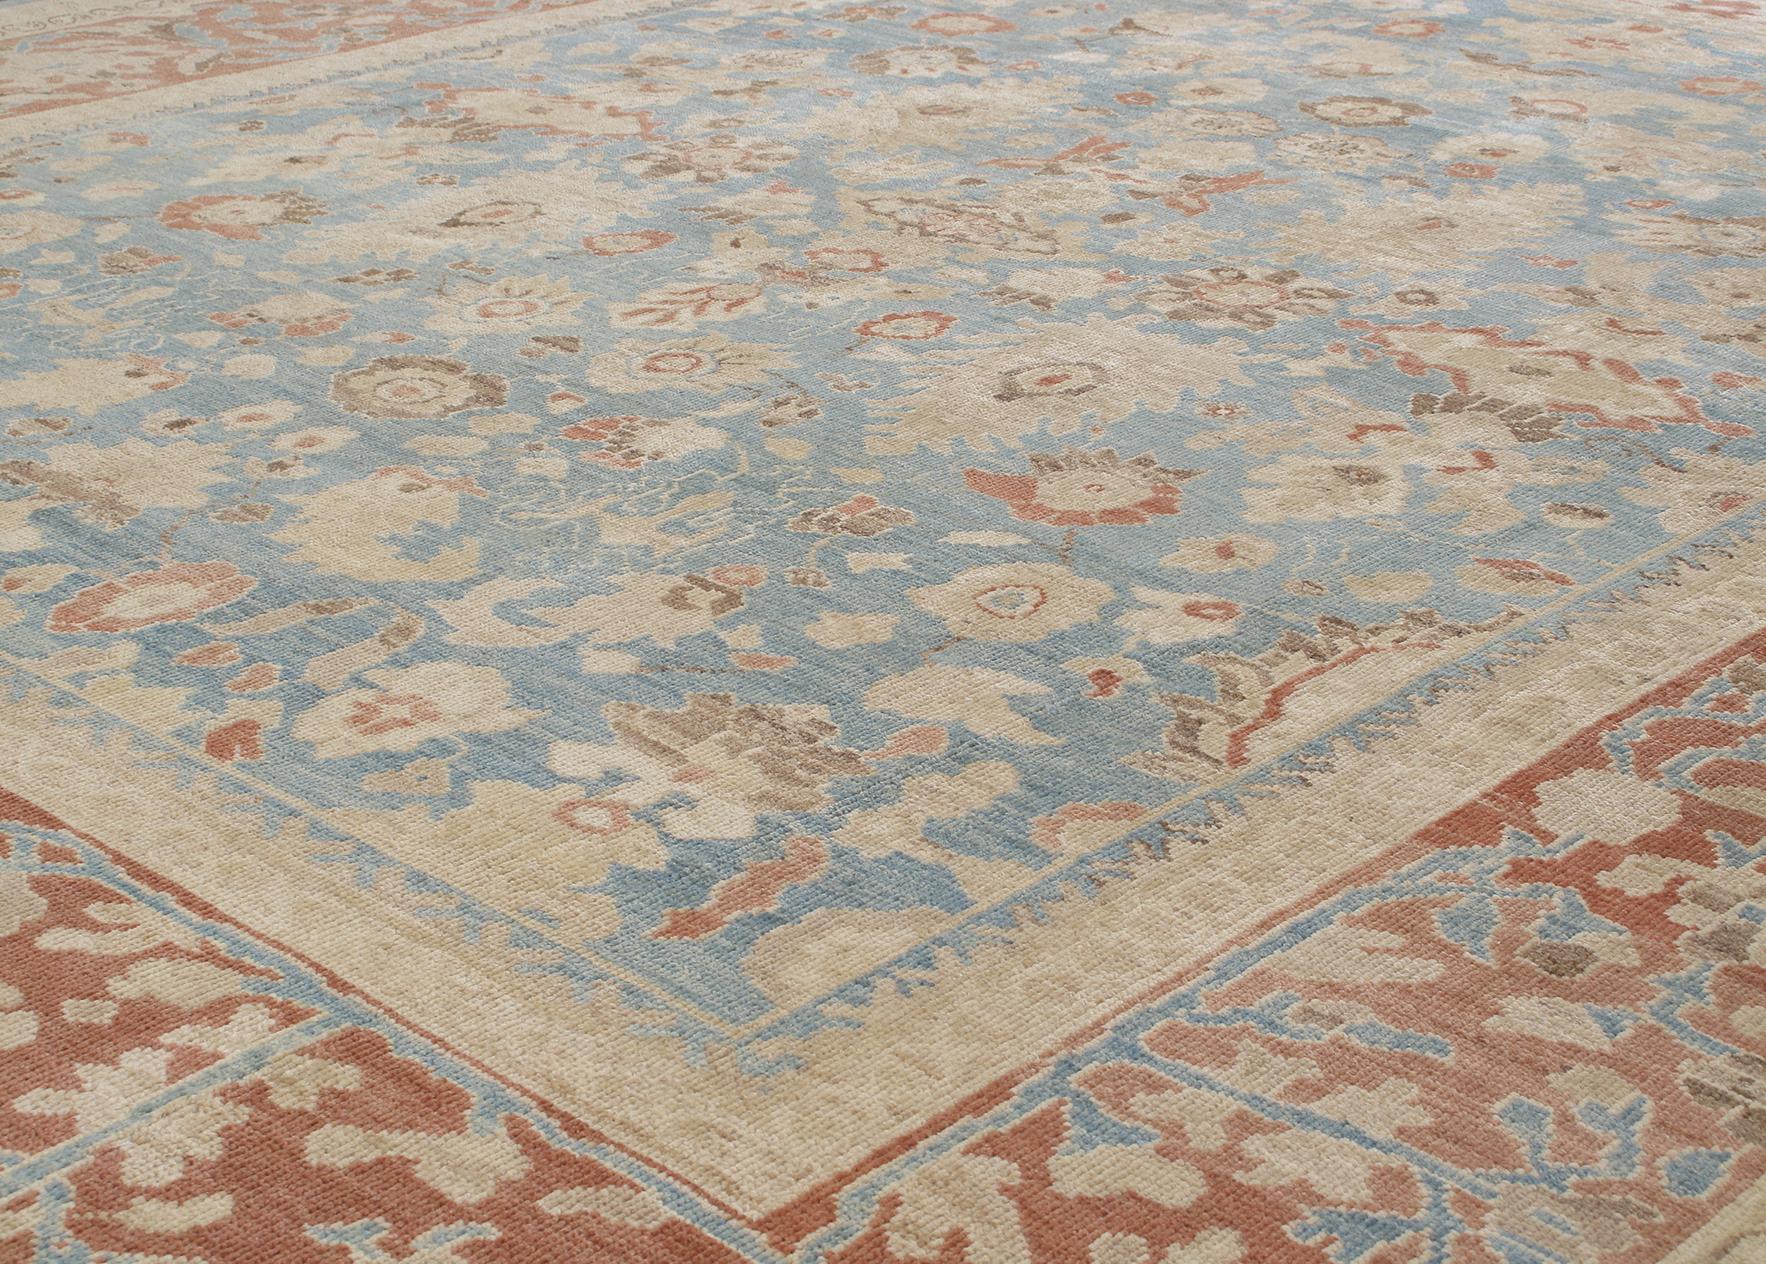 Made in Iran, this rug relates to the Zieglar Sultanabad collection: in 1875 the Anglo-Swiss company, Zieglar and Co. produced carpets in the Western region of Persia. They married tradition with innovation by employing designers from New York and